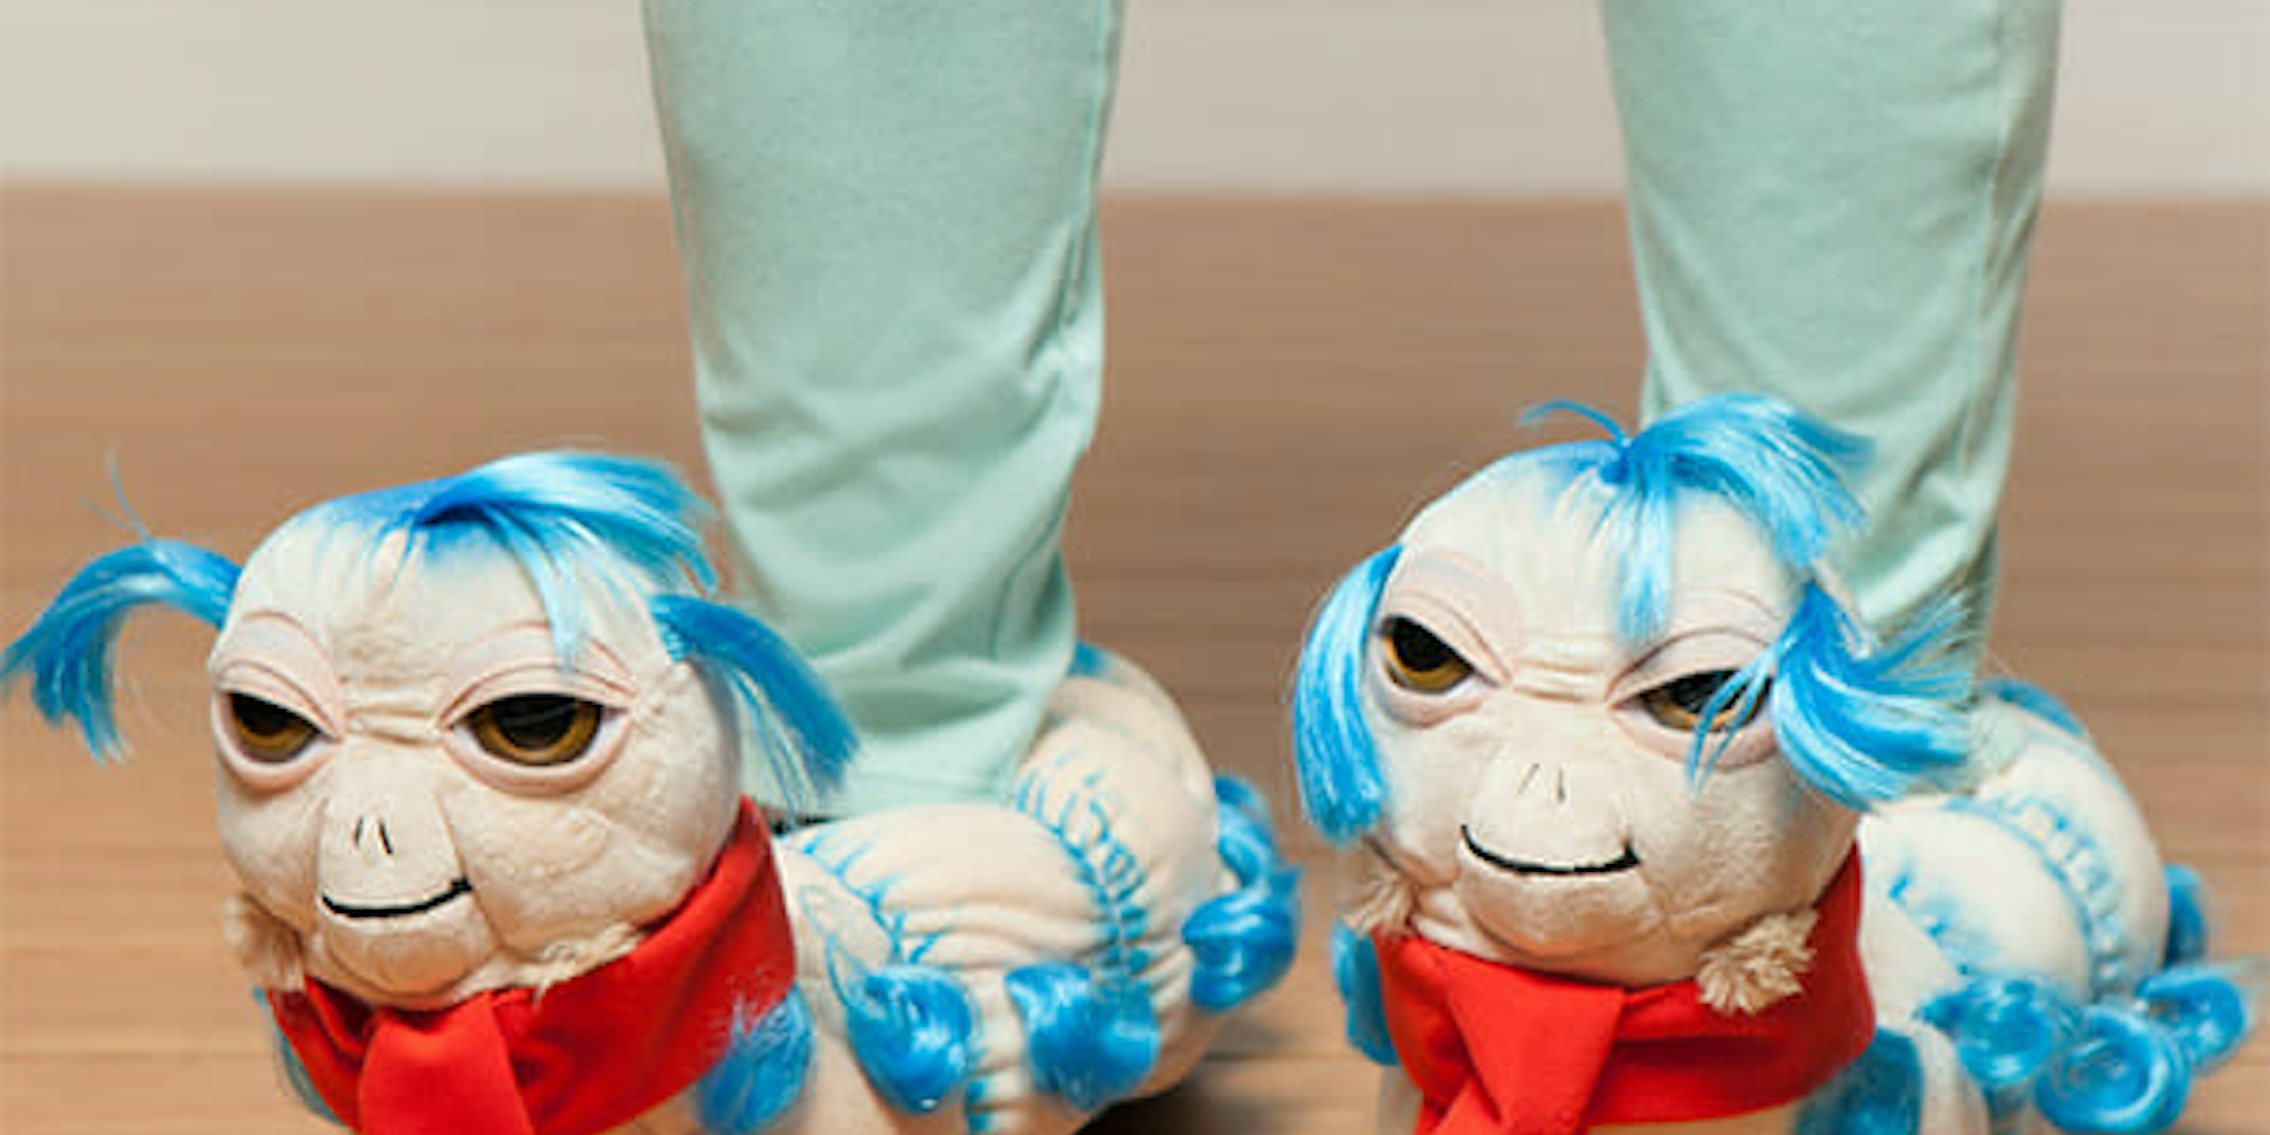 Labyrinth worm slippers